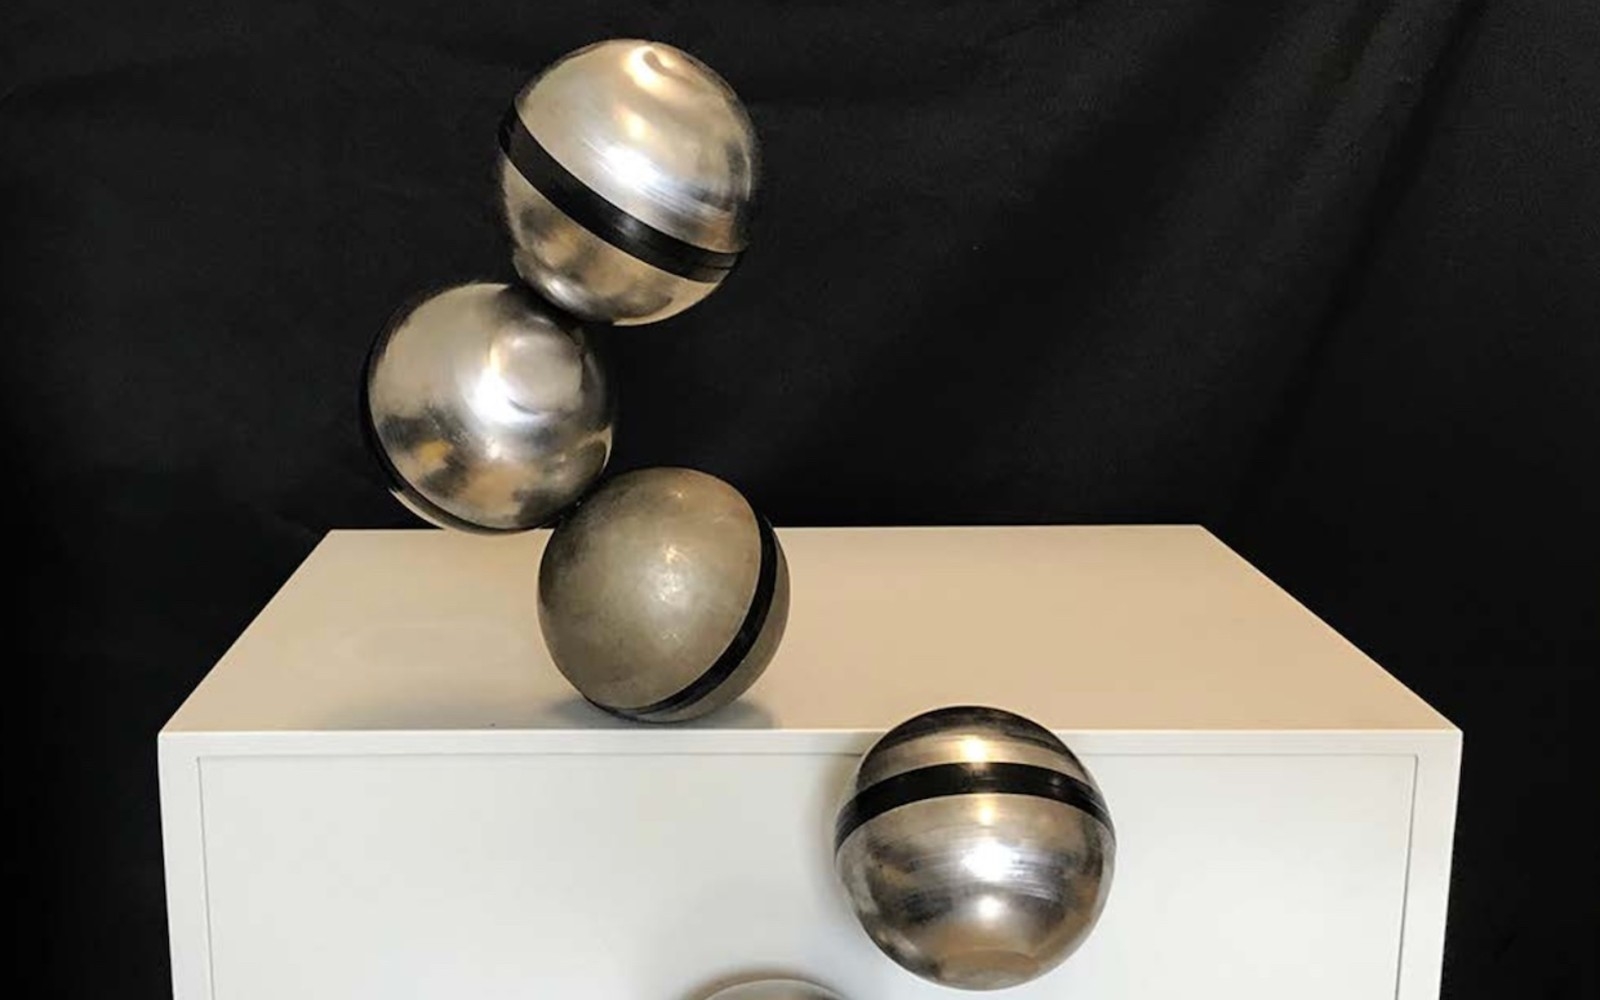 Magnetic FreeBOT orbs work together to climb large obstacles | DeviceDaily.com